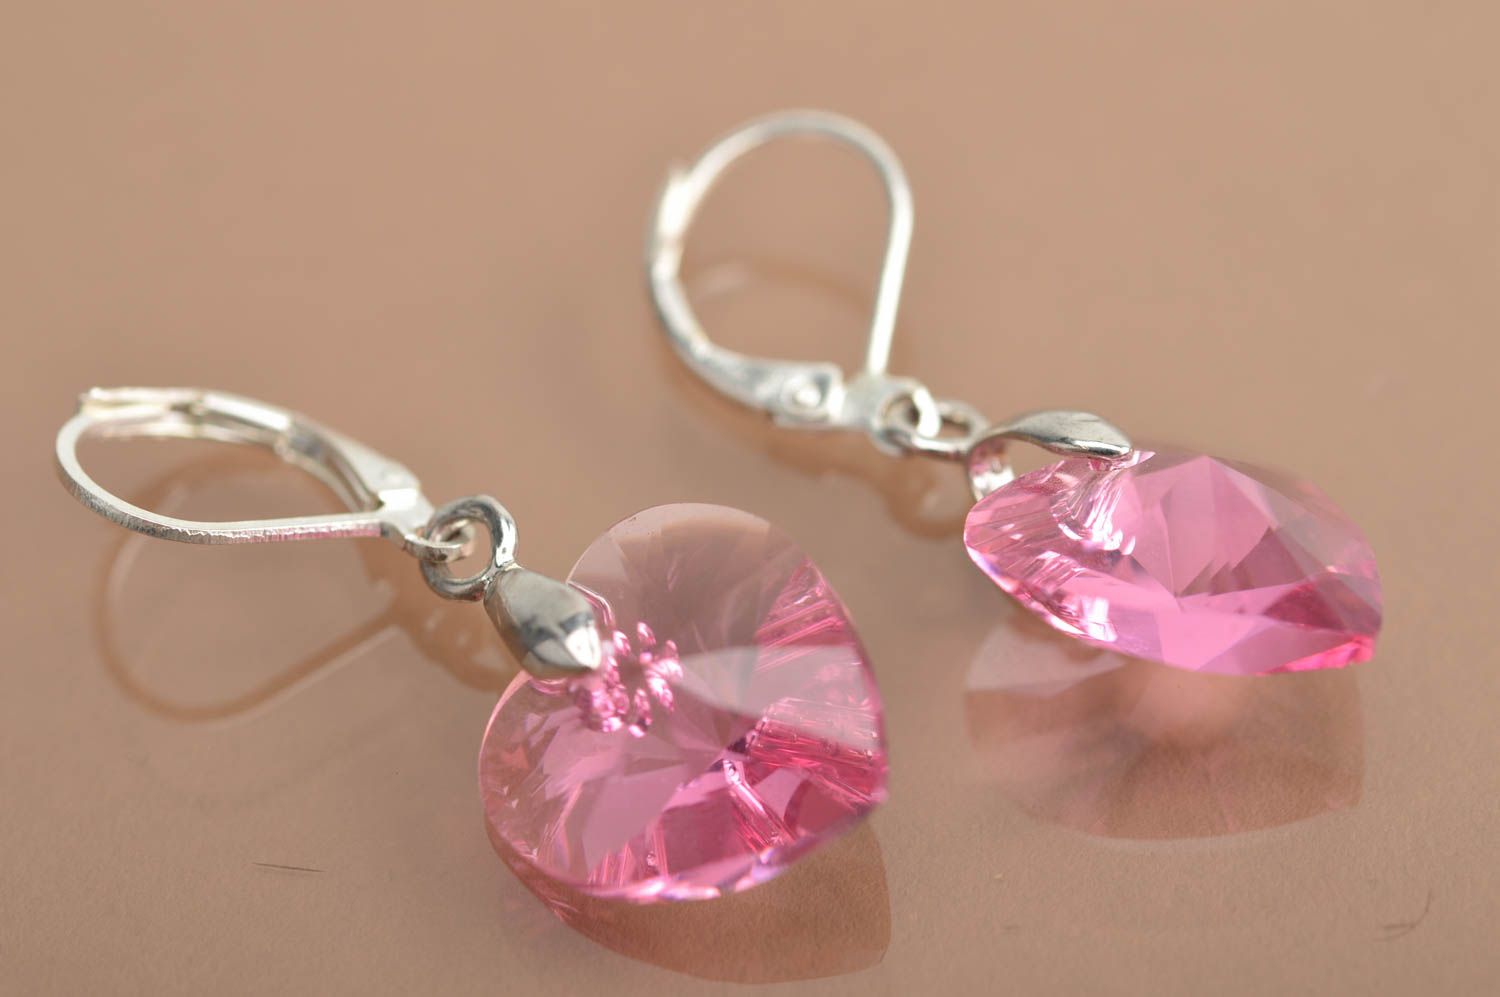 Handmade accessories earrings with crystals pink jewelry best gift ideas photo 2